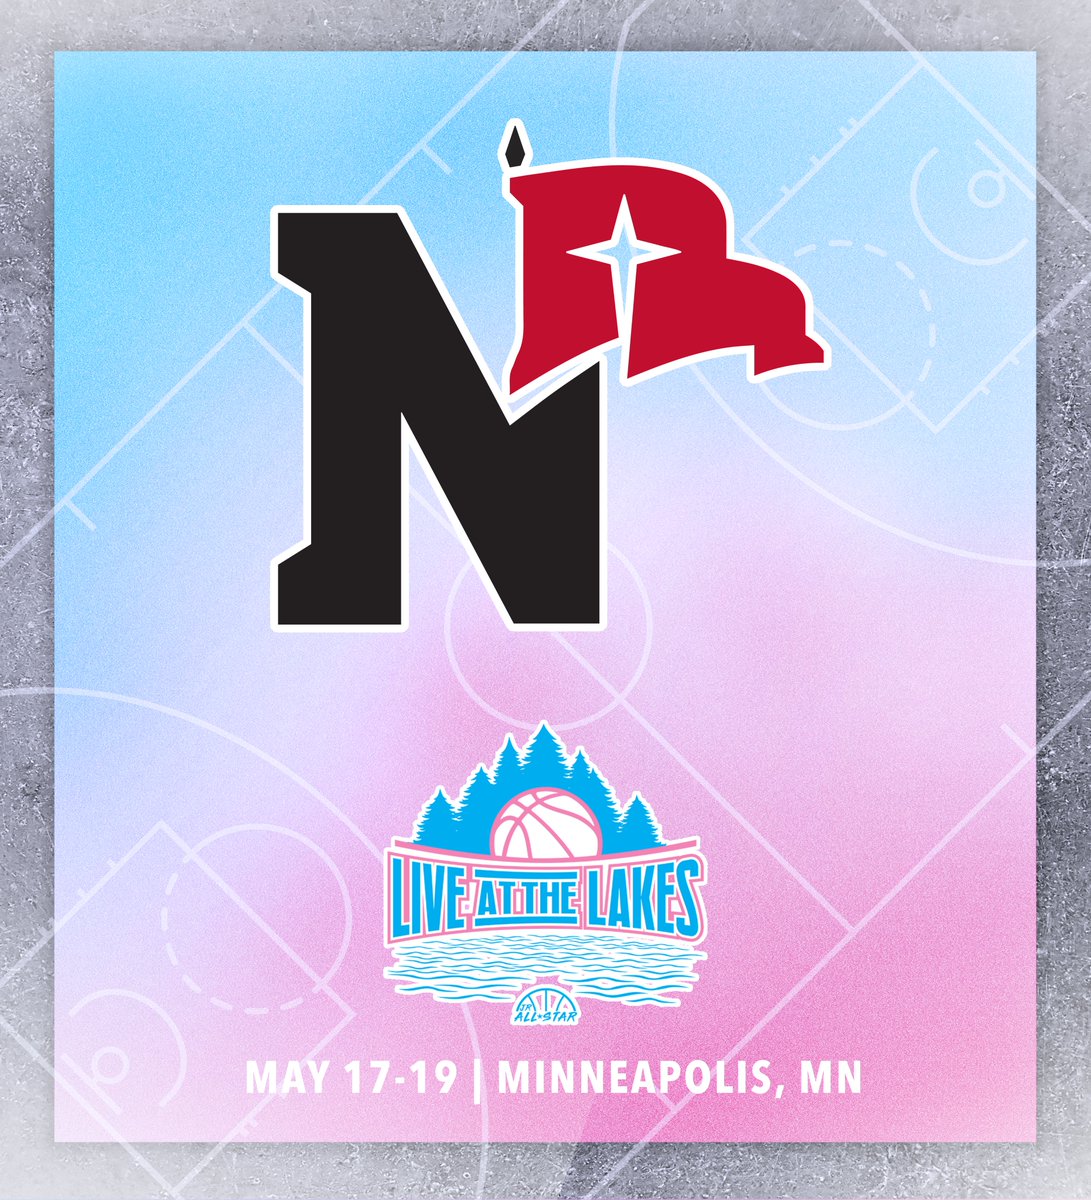 Northwestern College (@nwcwbasketball) is registered to attend 𝗟𝗜𝗩𝗘 𝗔𝗧 𝗧𝗛𝗘 𝗟𝗔𝗞𝗘𝗦! Join them in watching some of the nation’s best during the May Viewing Period.👇 jrallstar.com/exposure-event…